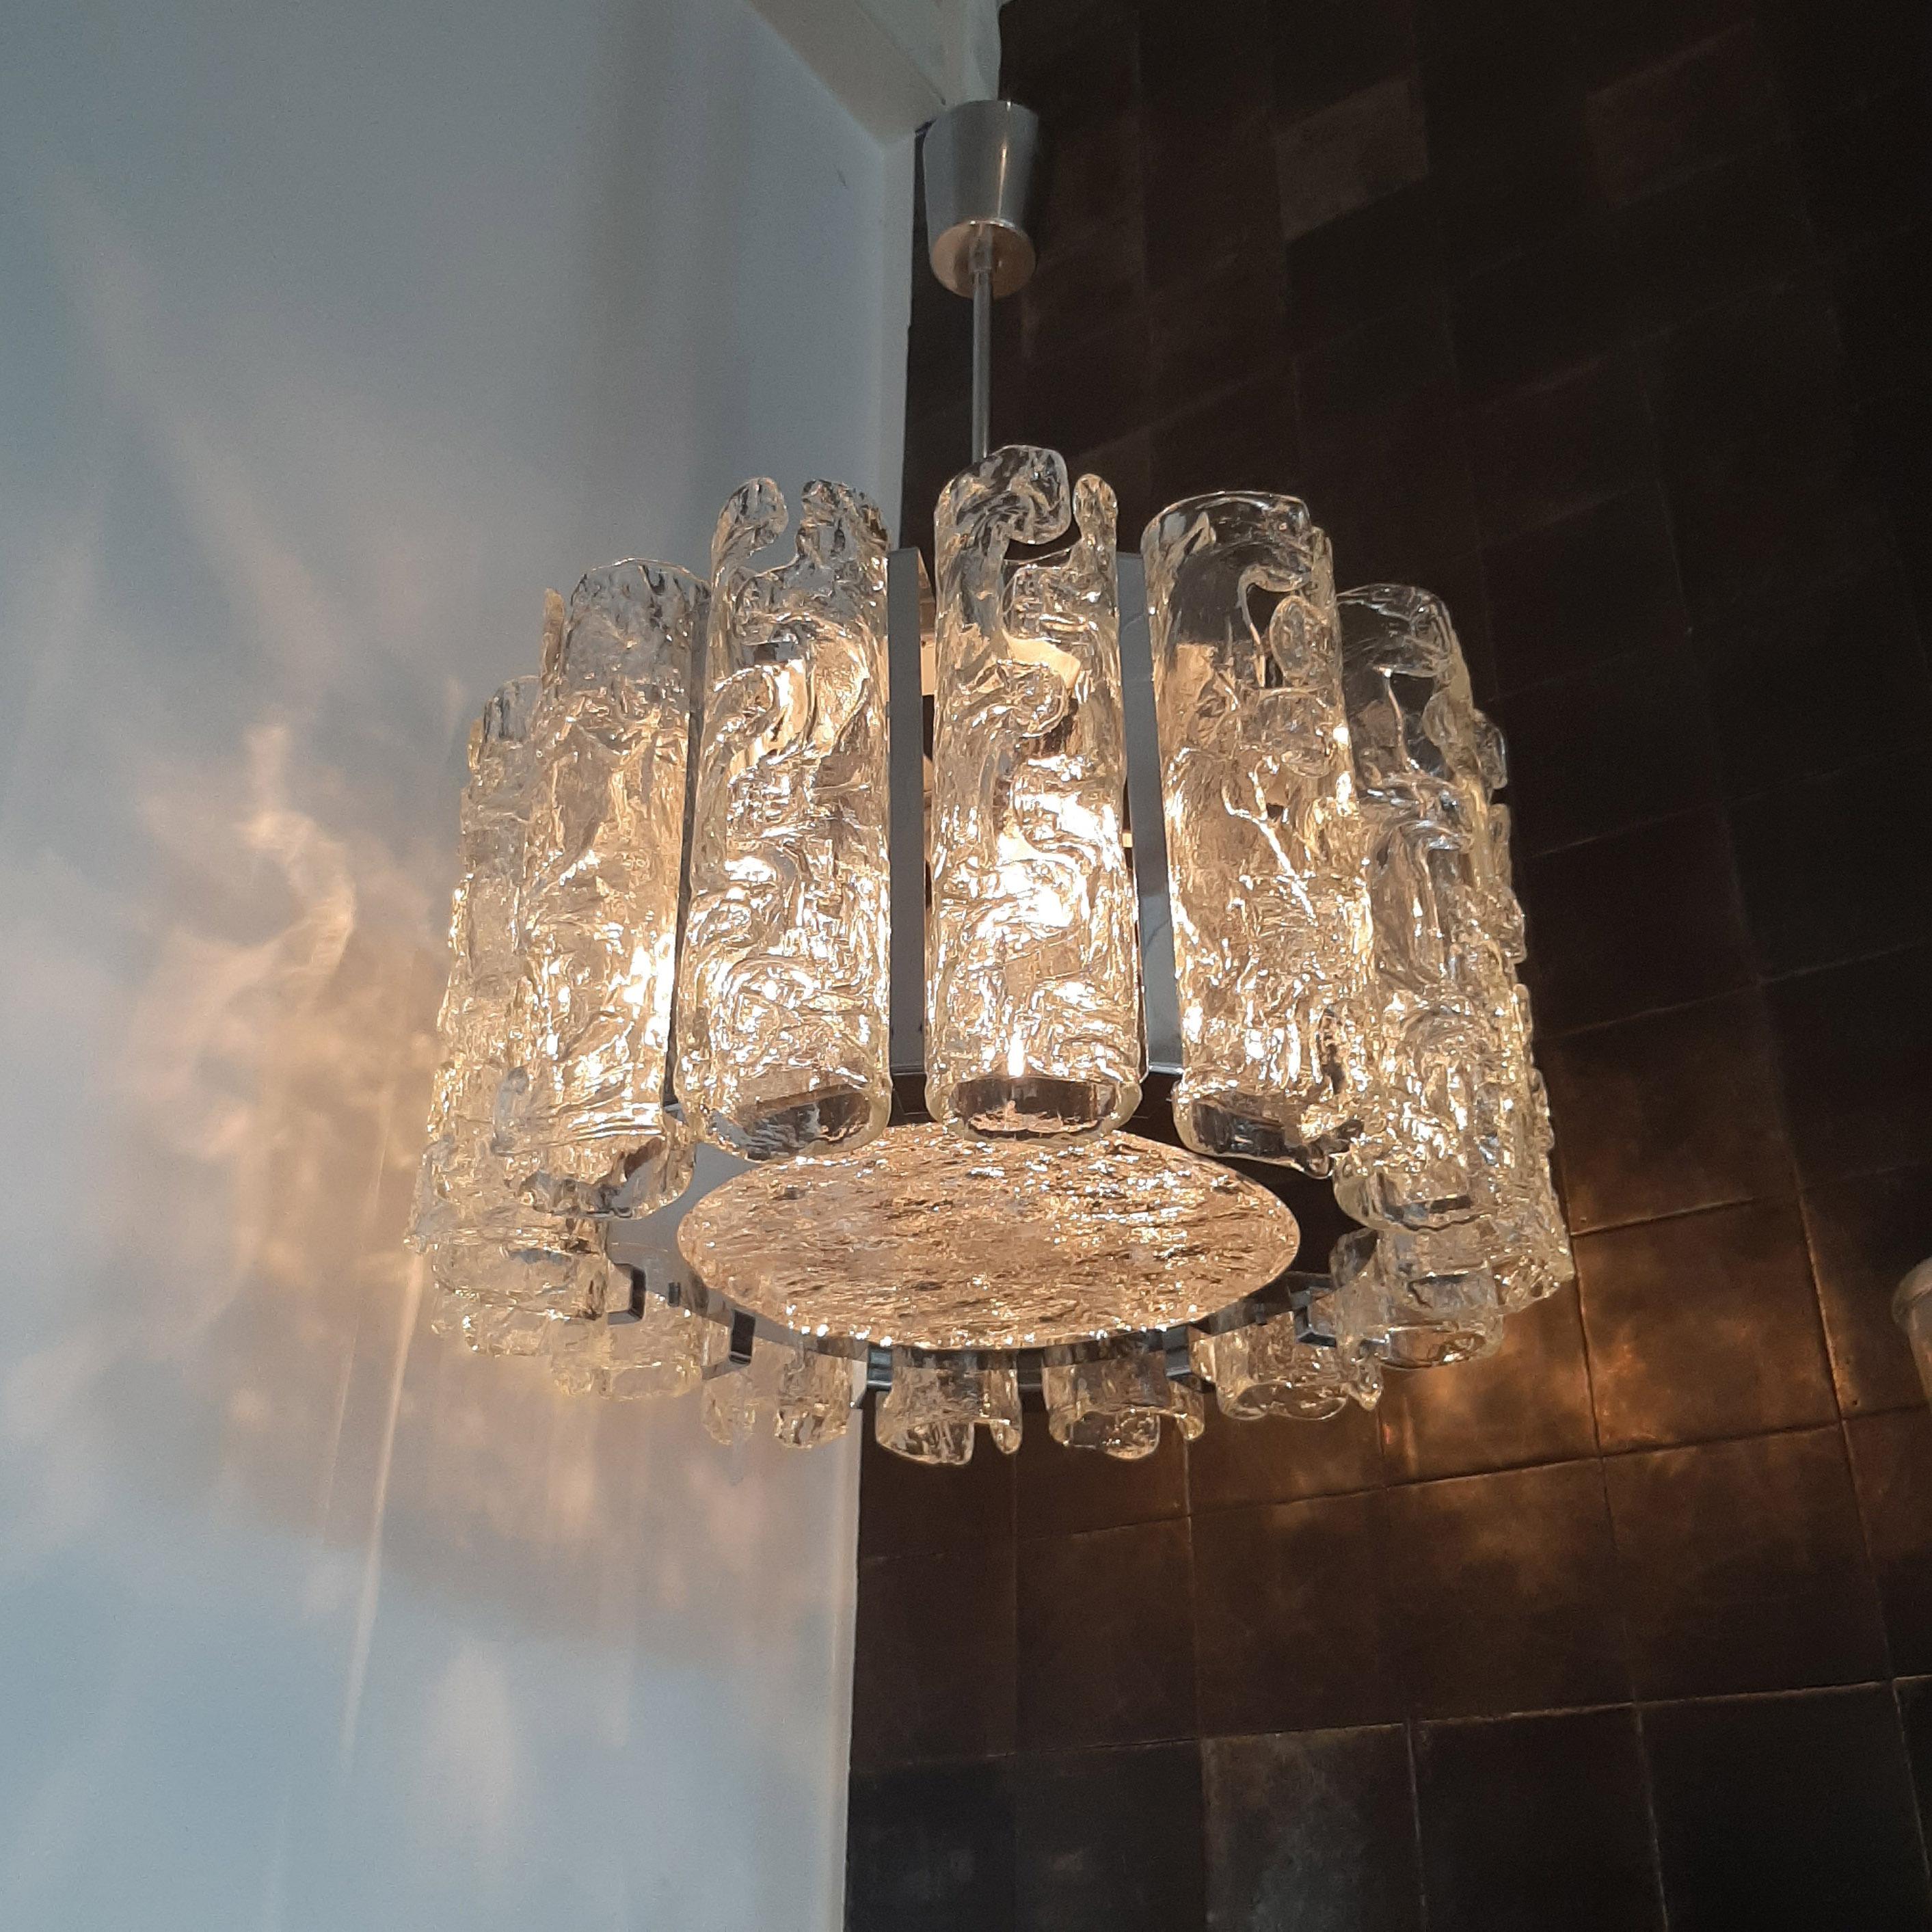 Vintage Italian glass and chrome Venini chandelier. The clear glass tubes have been worked with the Corteccia technique which gives them a bark-like texture effect and have been mounted on a chrome frame.
Venini designed luxury glass lighting. This